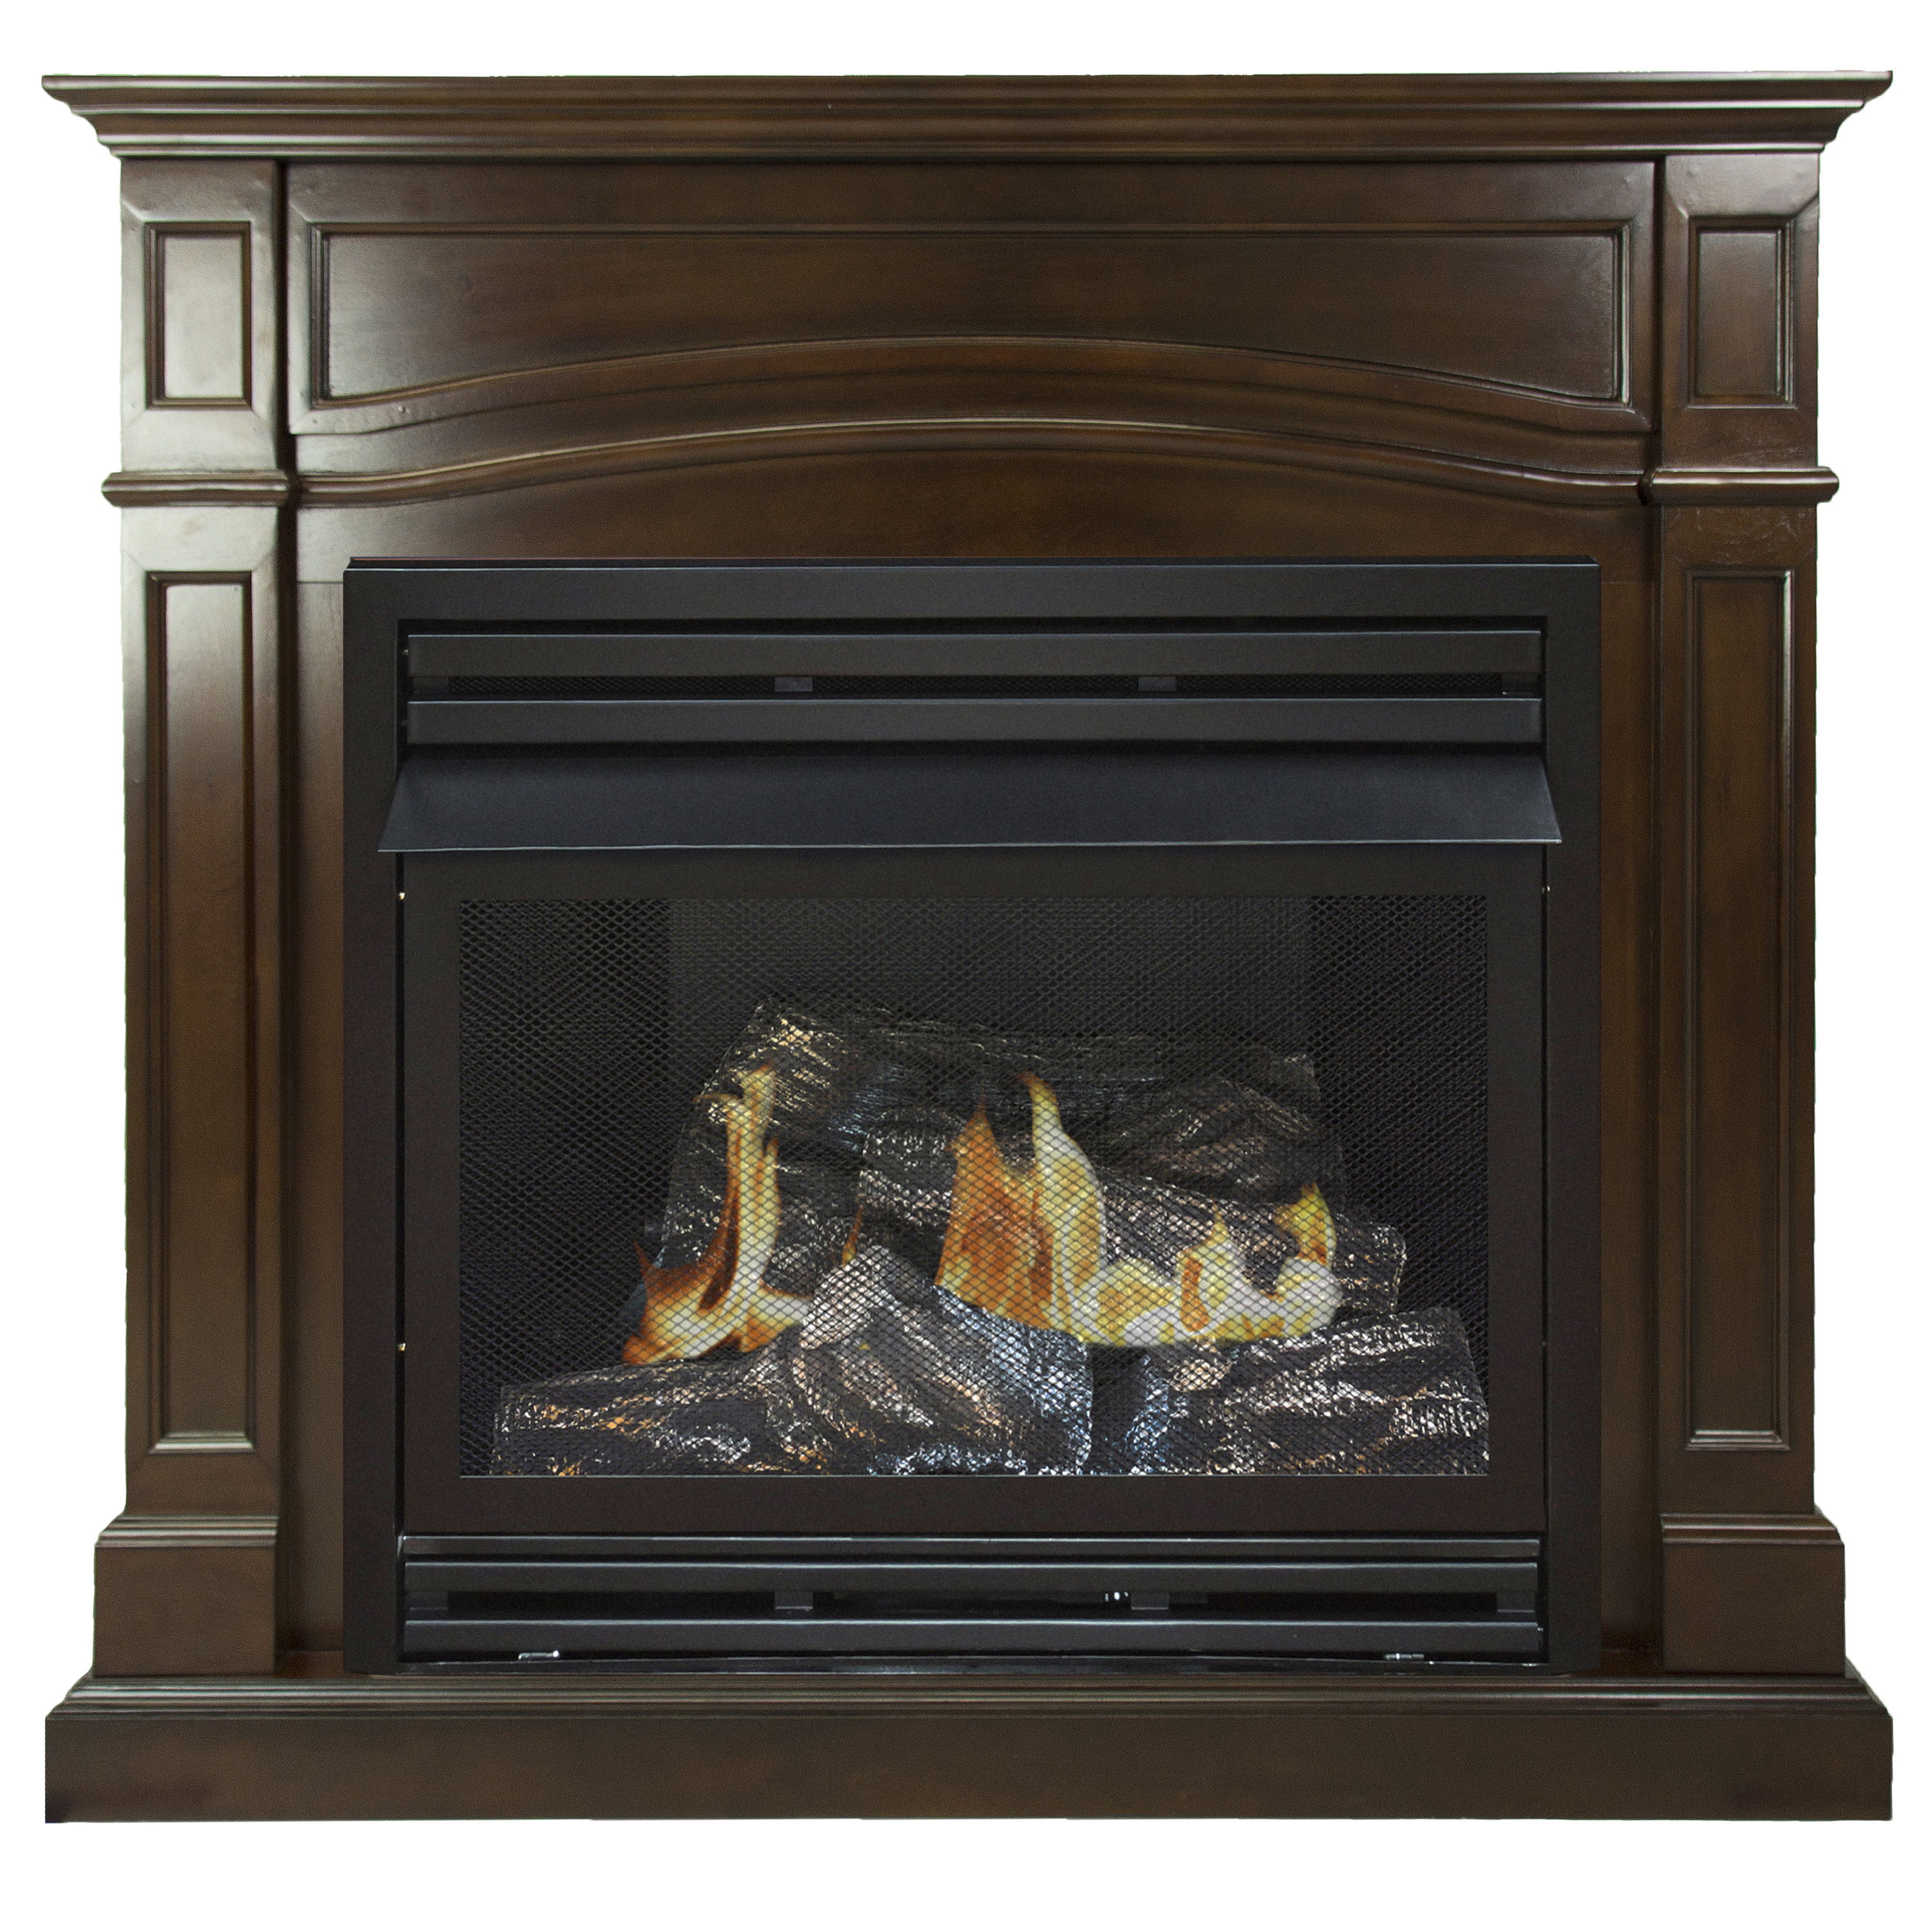 Ventless Gas Fireplace Hearth Awesome Pleasant Hearth 46 In Natural Gas Full Size Cherry Vent Free Fireplace System 32 000 Btu